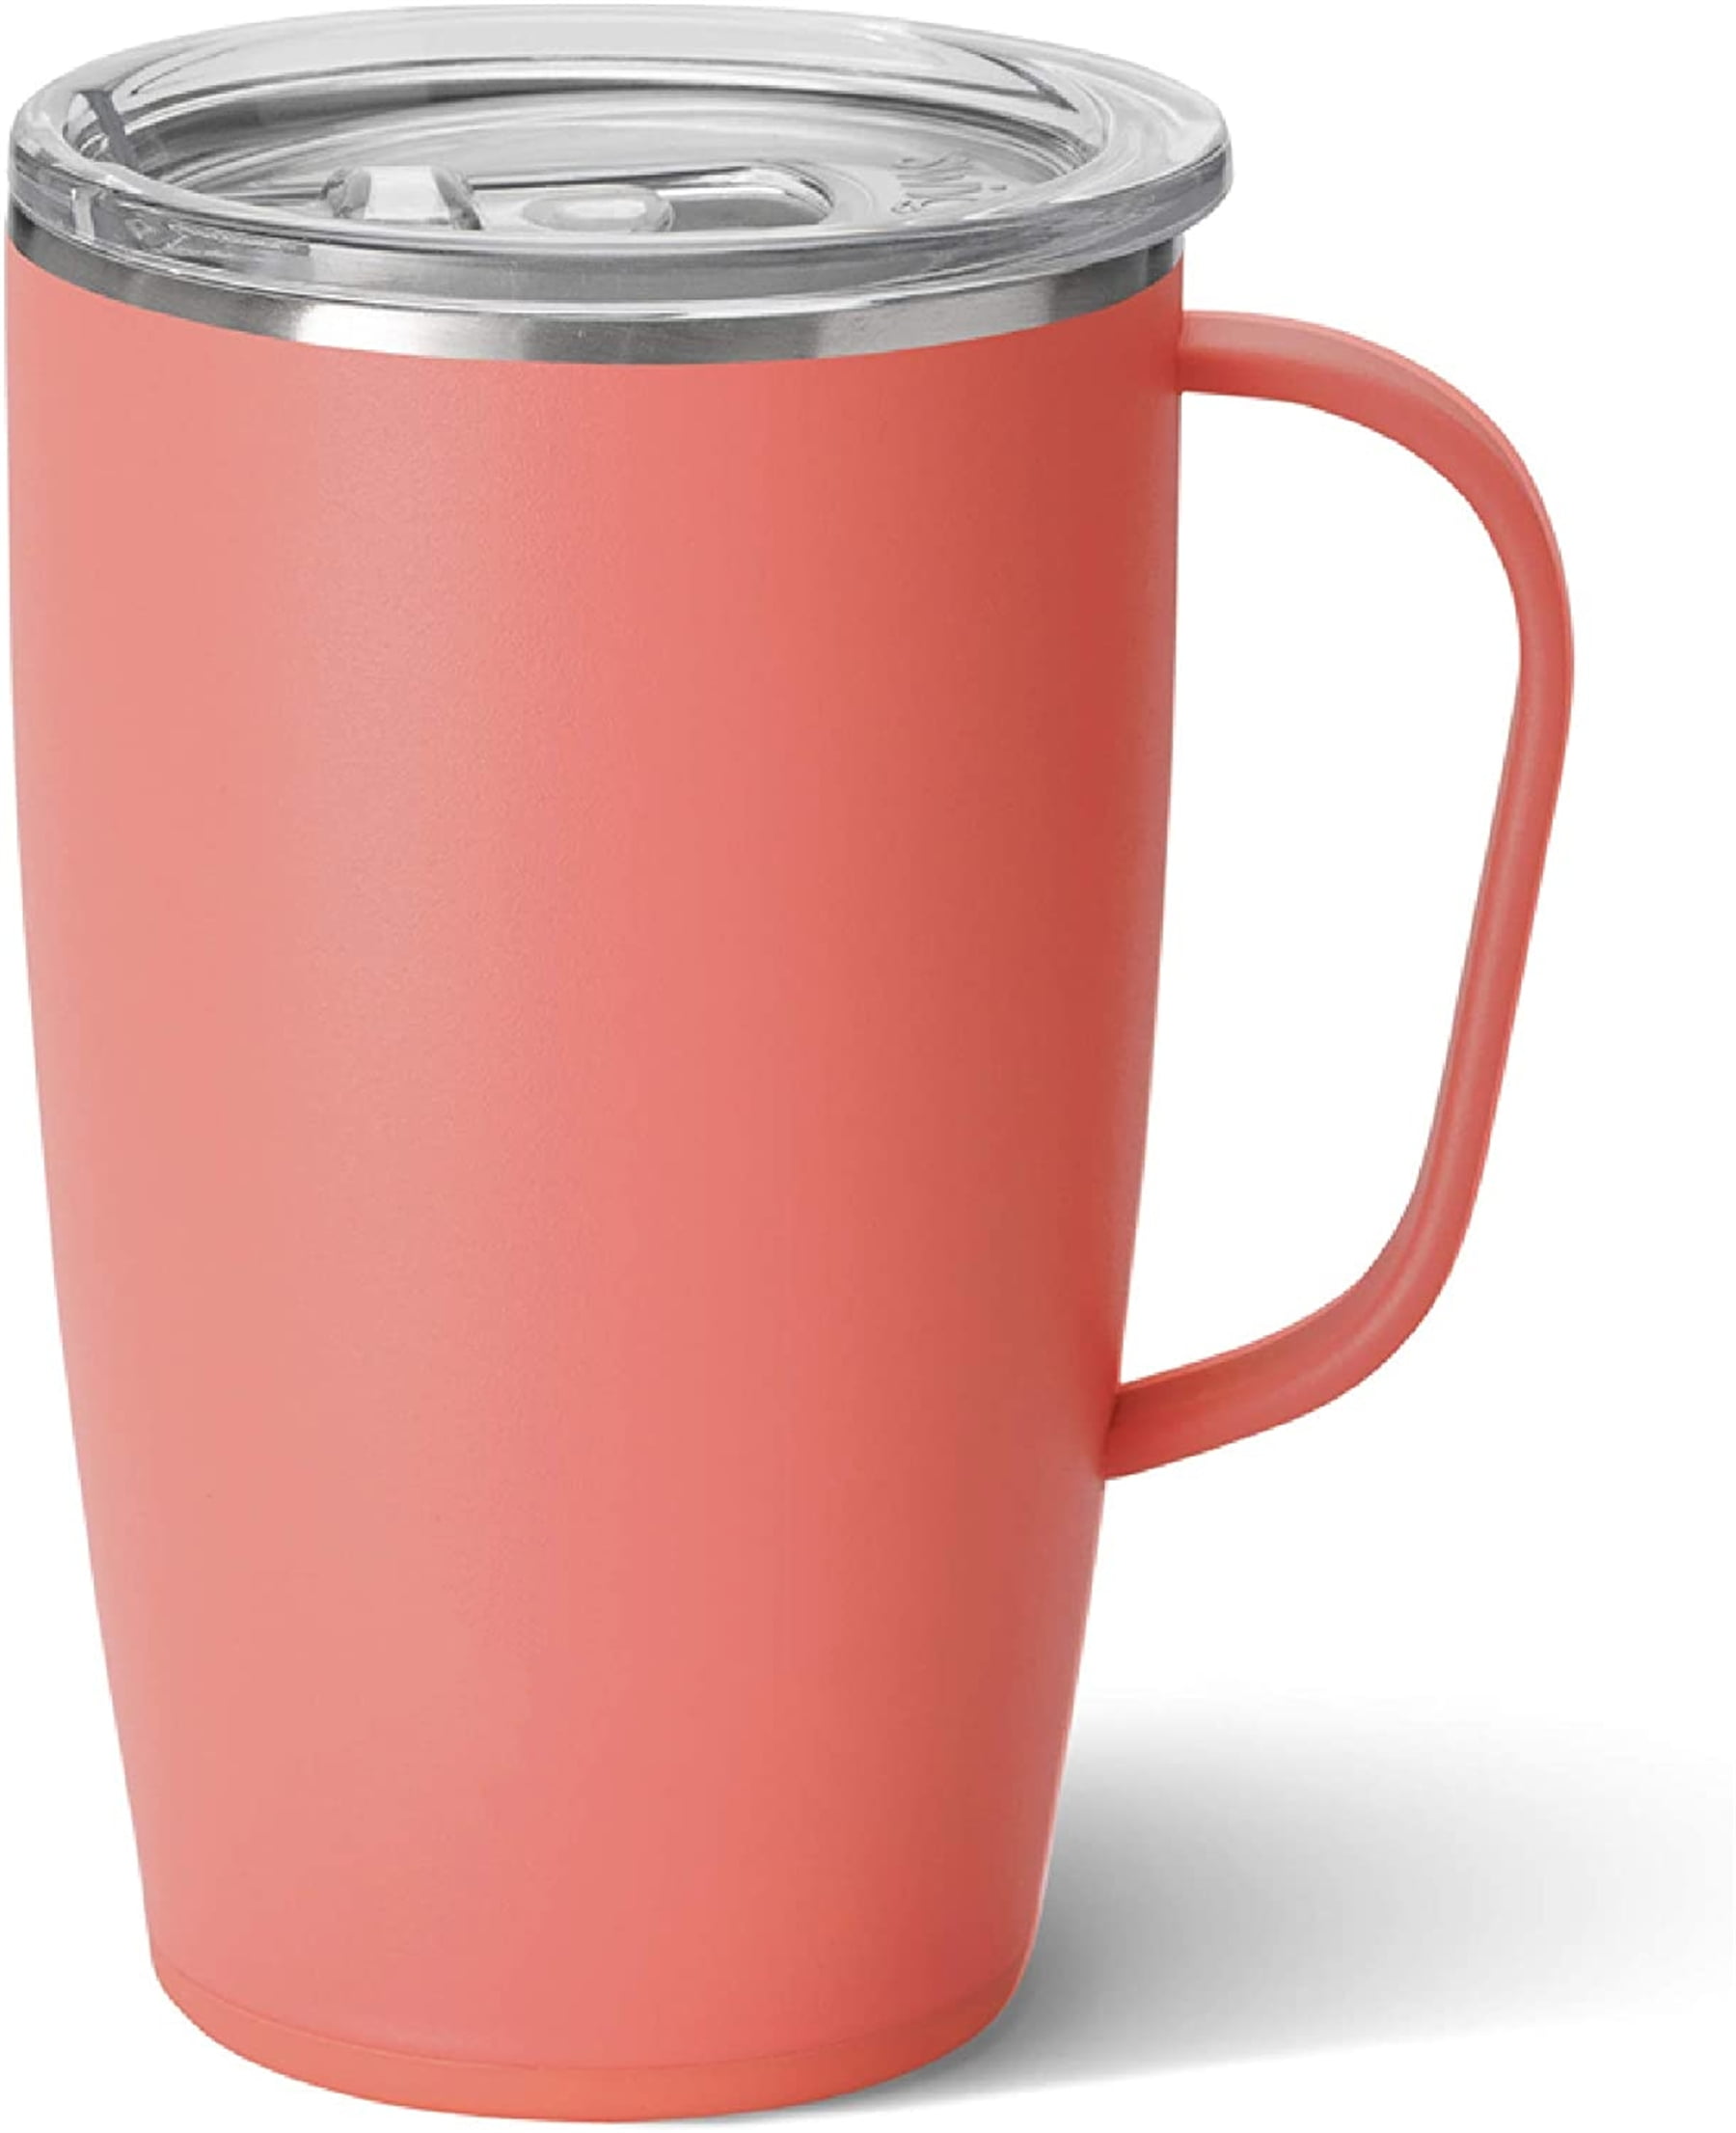 22Oz Tall Travel Mug with Handle and Lid, Cup Holder Friendly, Dishwasher  Safe